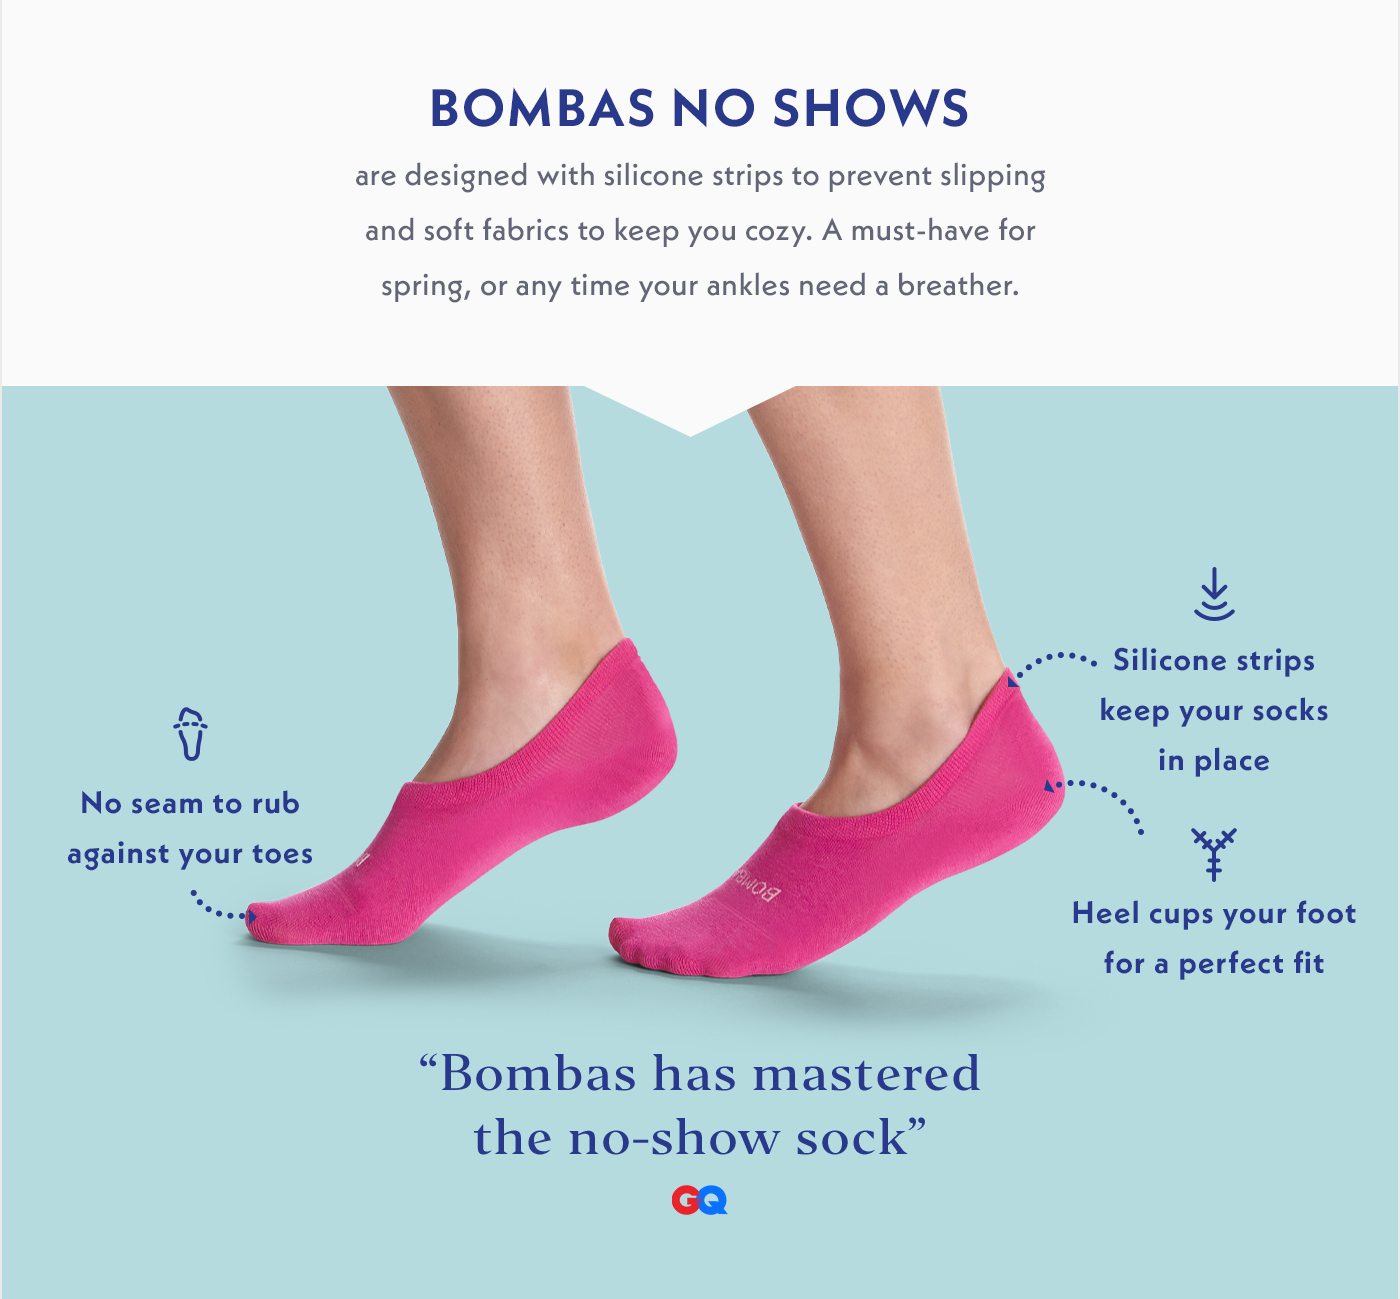 Bombas No Shows are designed with silicone strips to prevent slipping and soft fabrics to keep you cozy. A must-have for spring, or any time your ankles need a breather. | No seam to rub against your toes | Silicone strips to keep your socks in place | Heel cups your foot for a perfect fit | Bombas has mastered the no-show sock -GQ